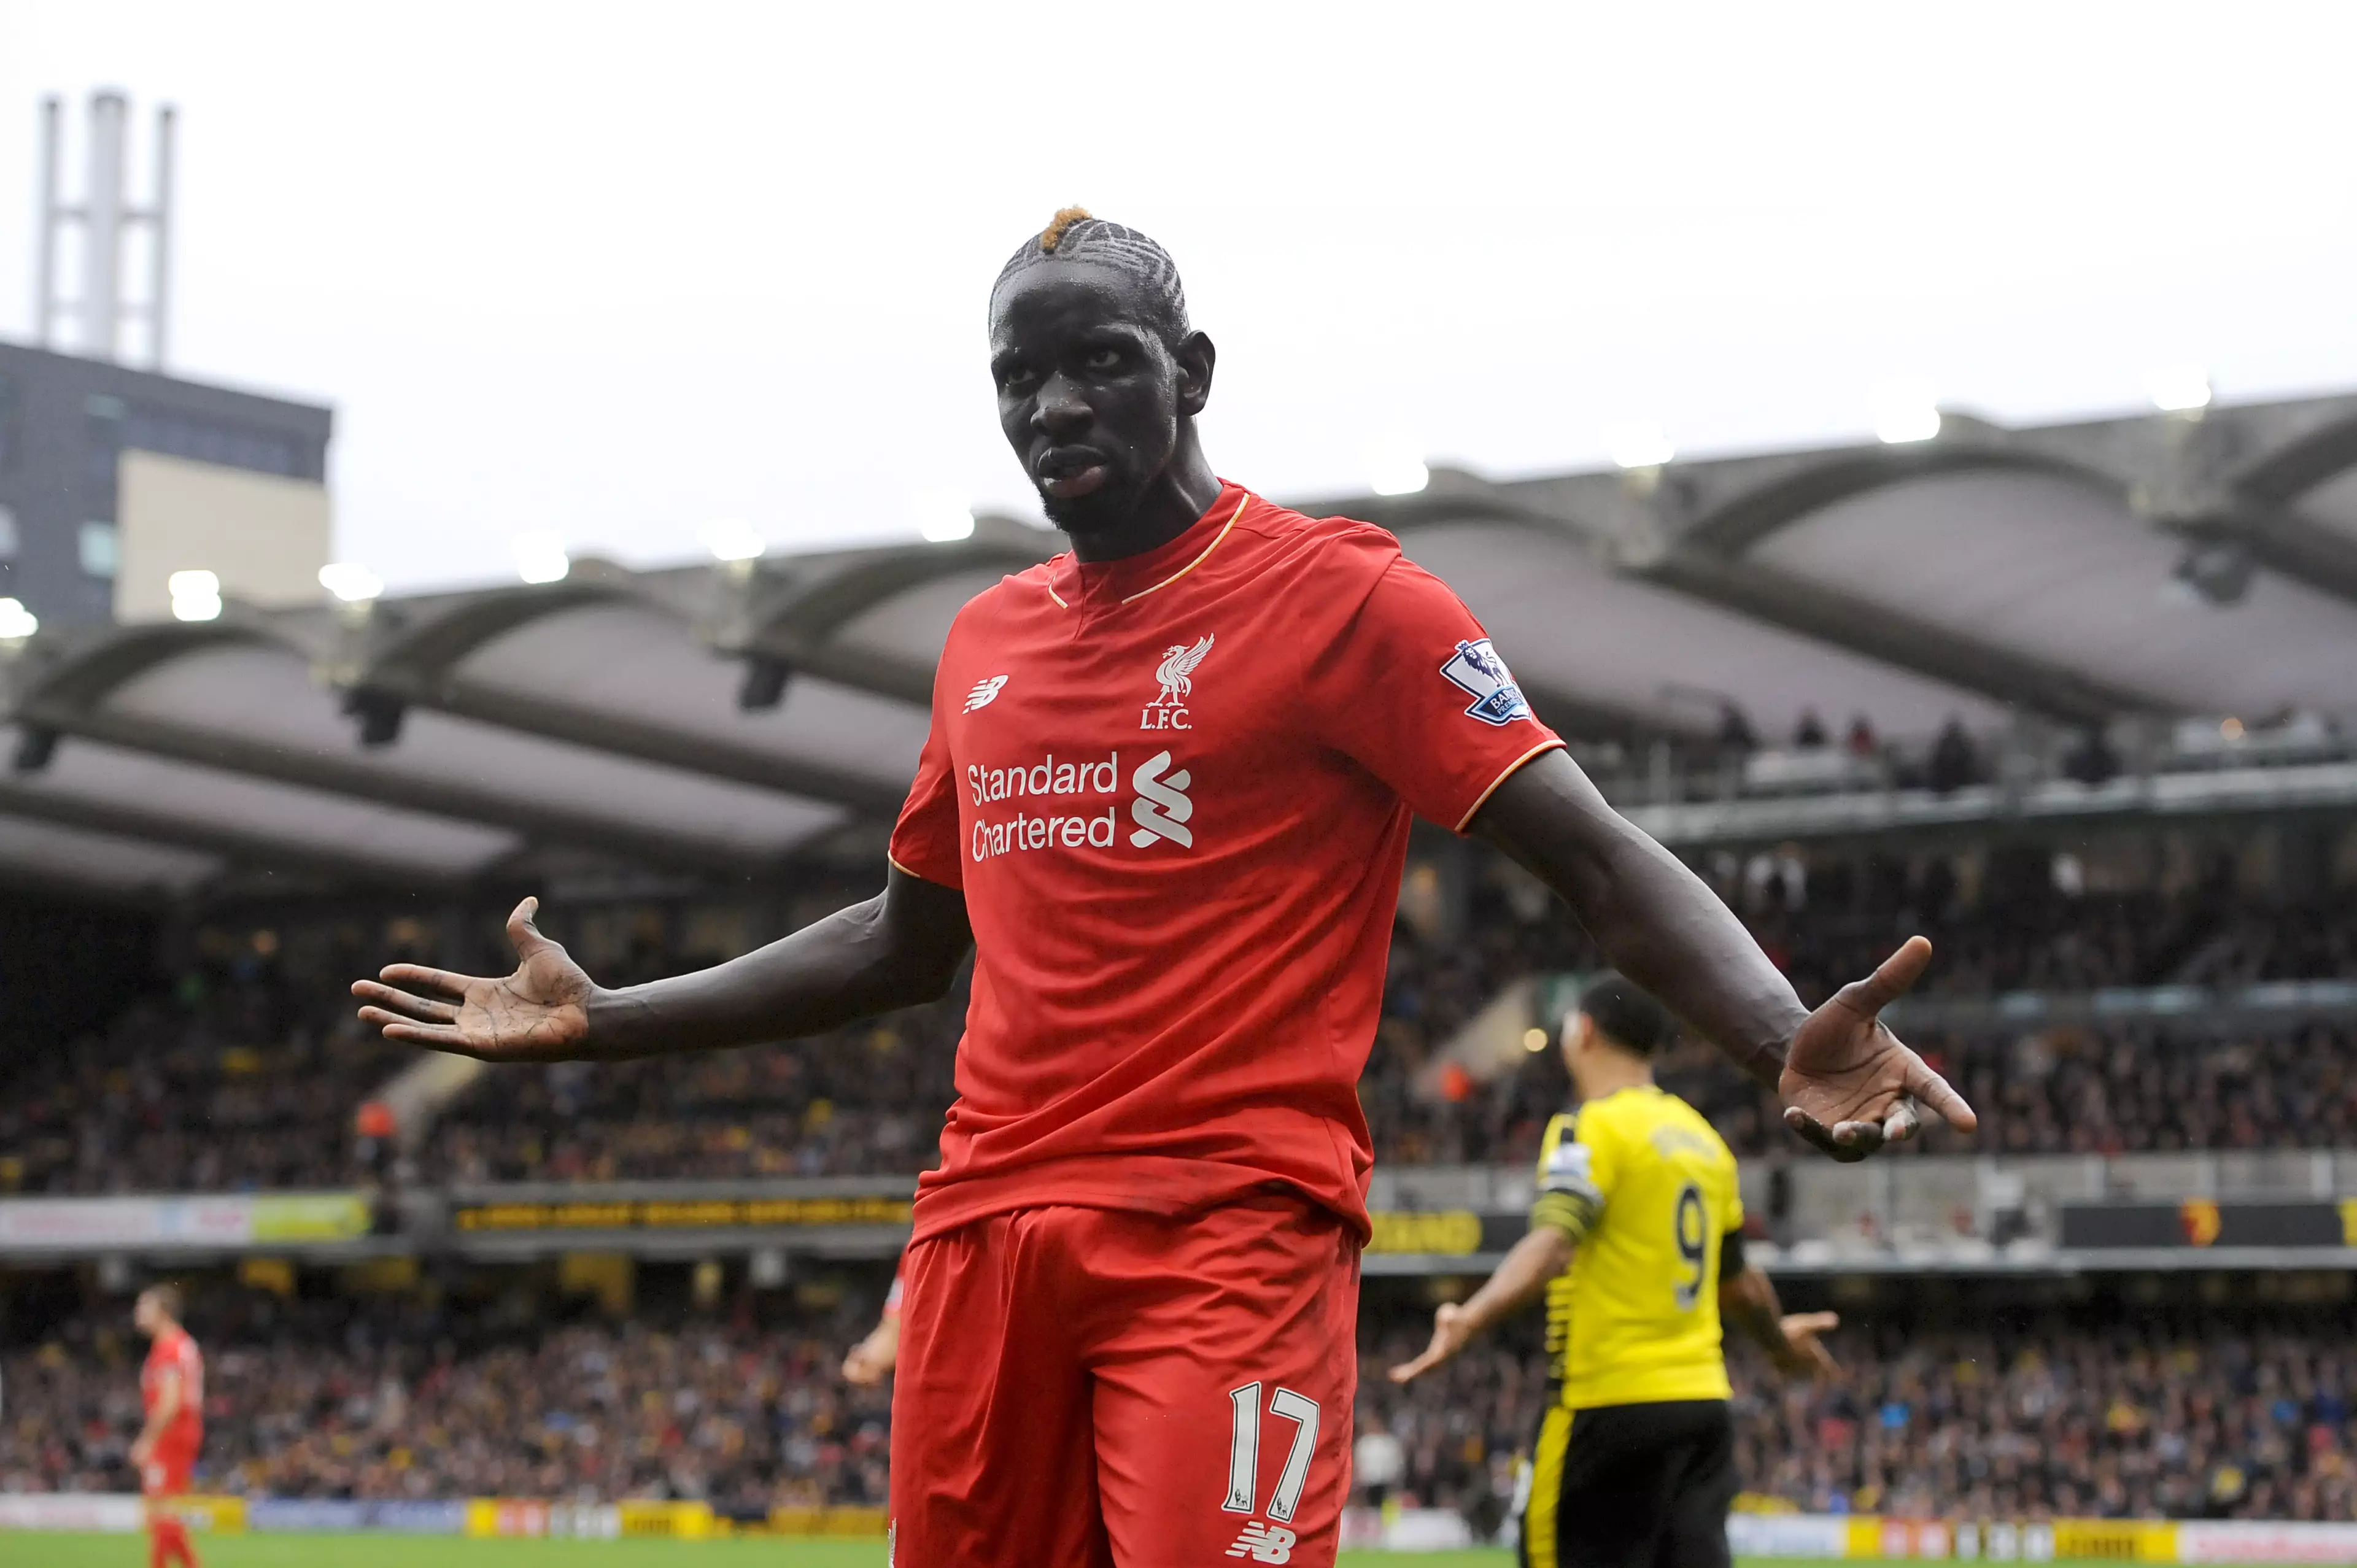 Mamadou Sakho Could Be Facing A Huge Ban If Found Guilty Of Doping